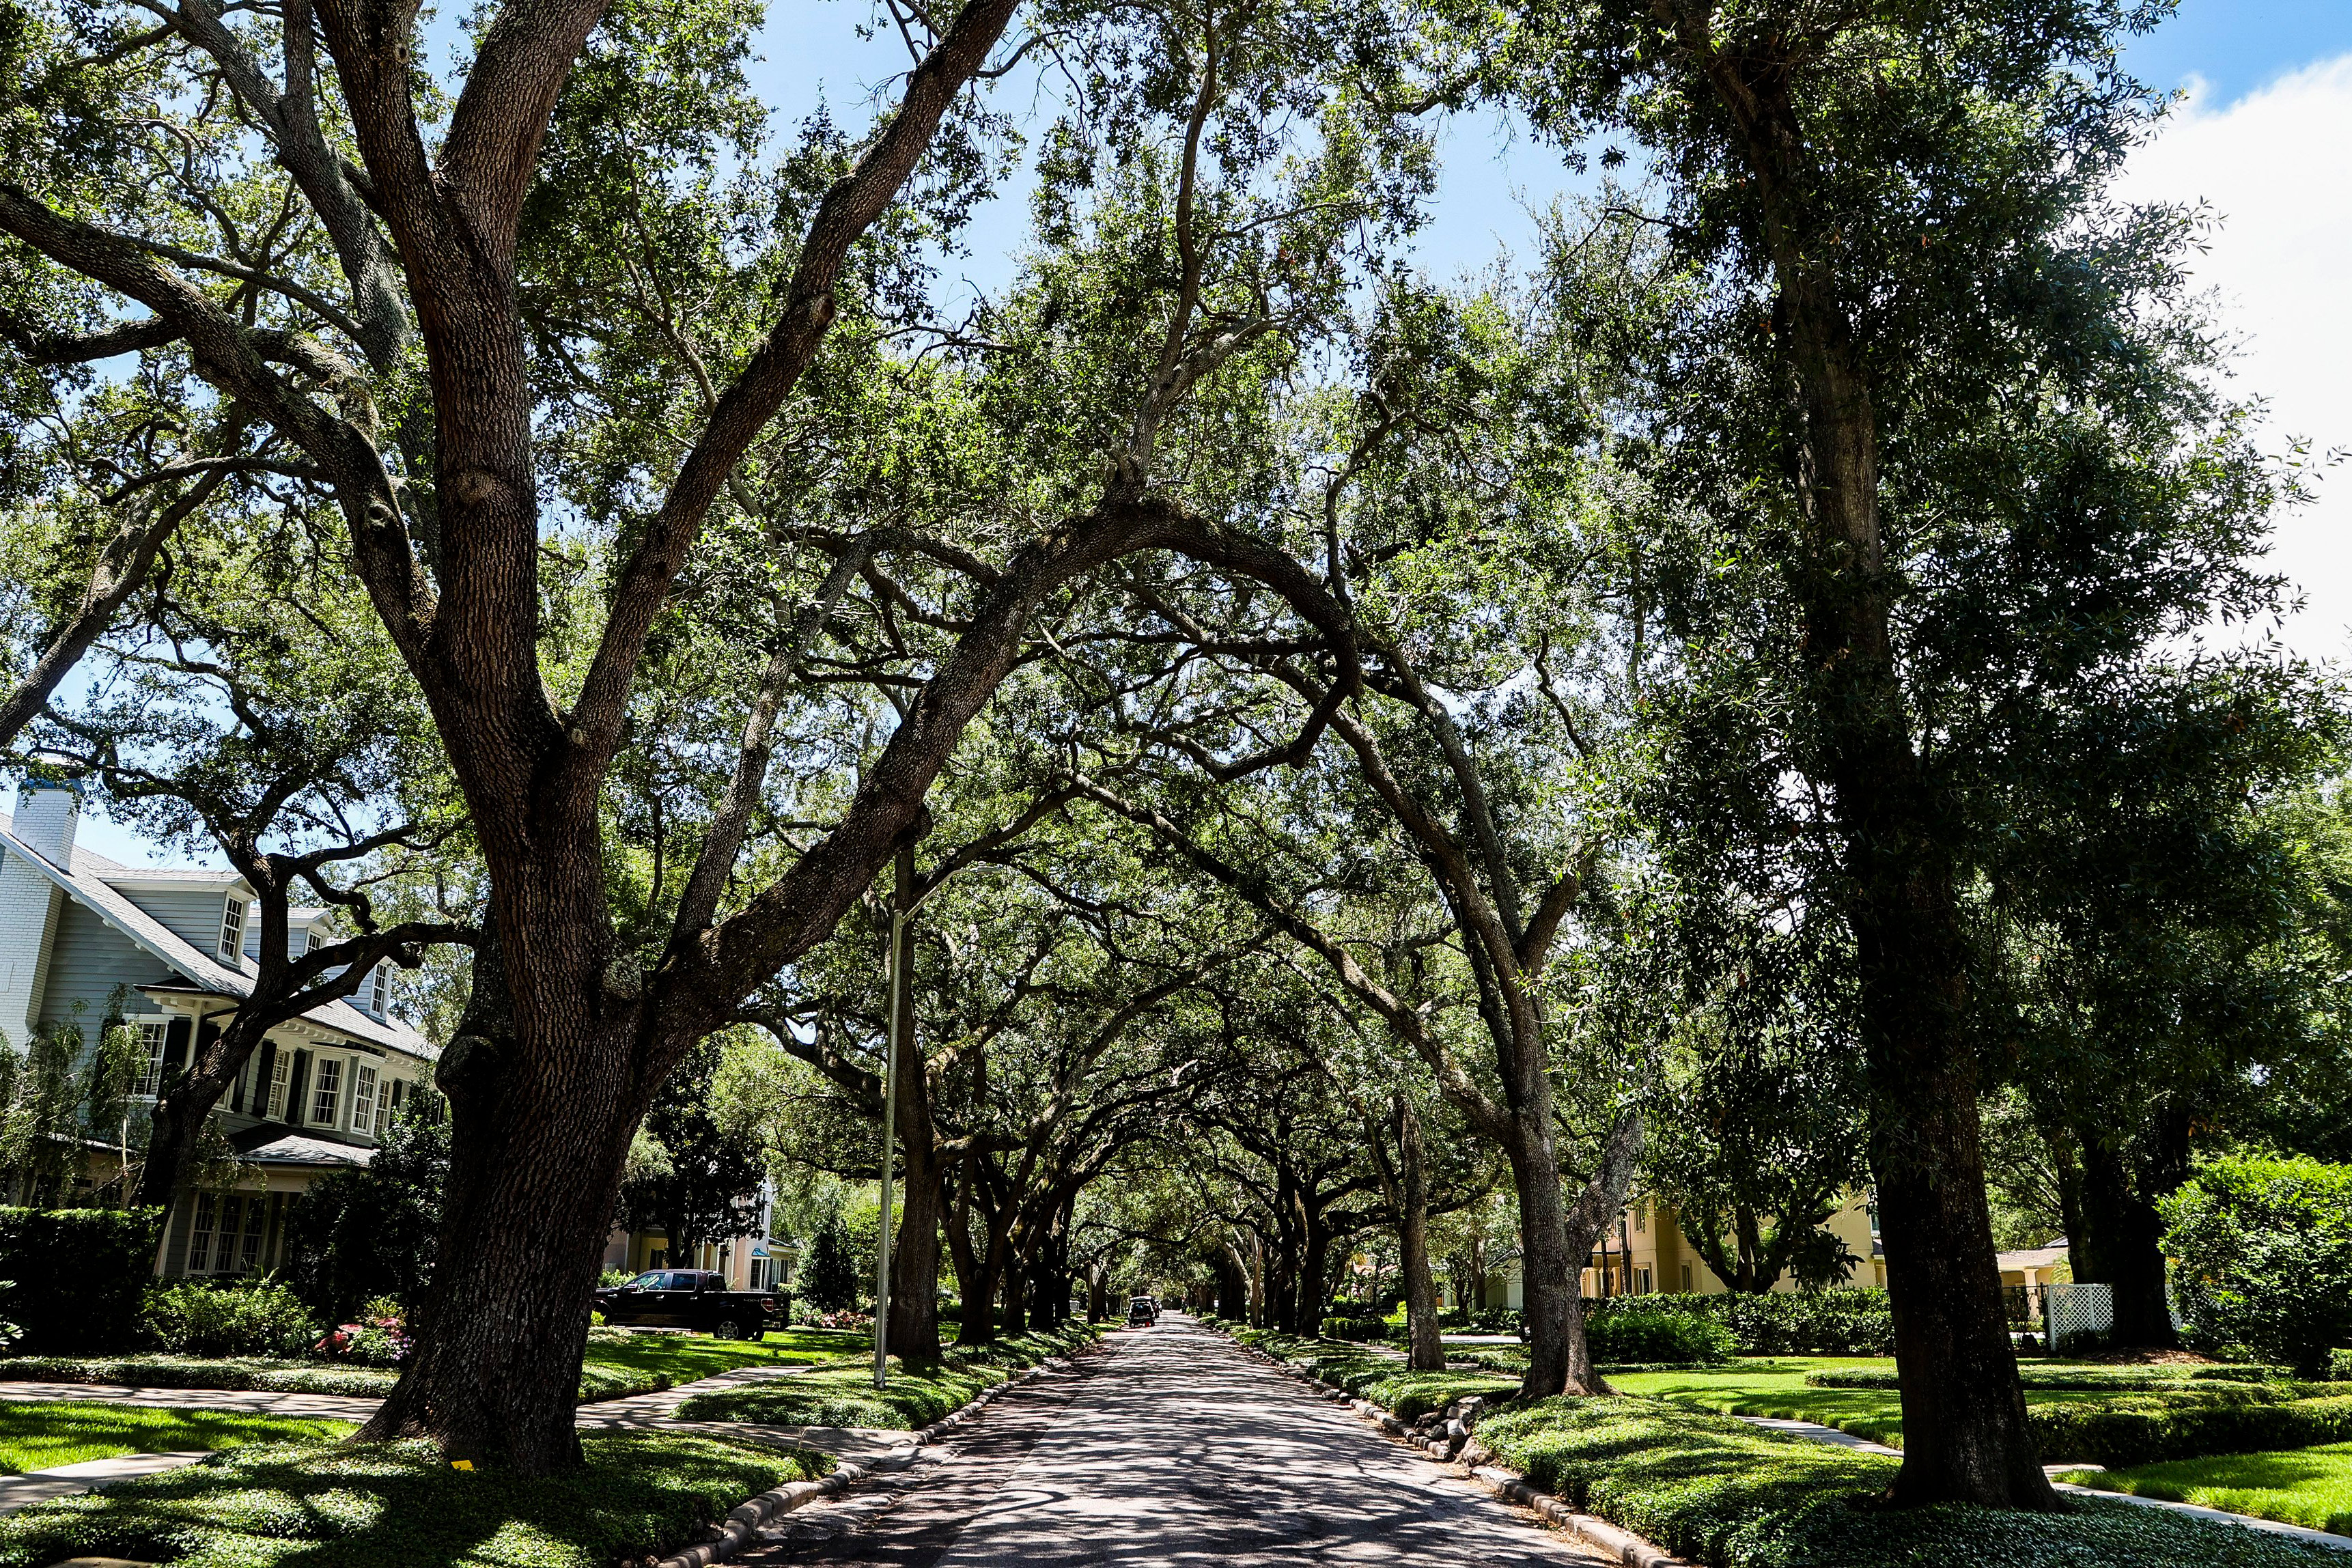 A photo of a shaded neighborhood street lined with several trees.